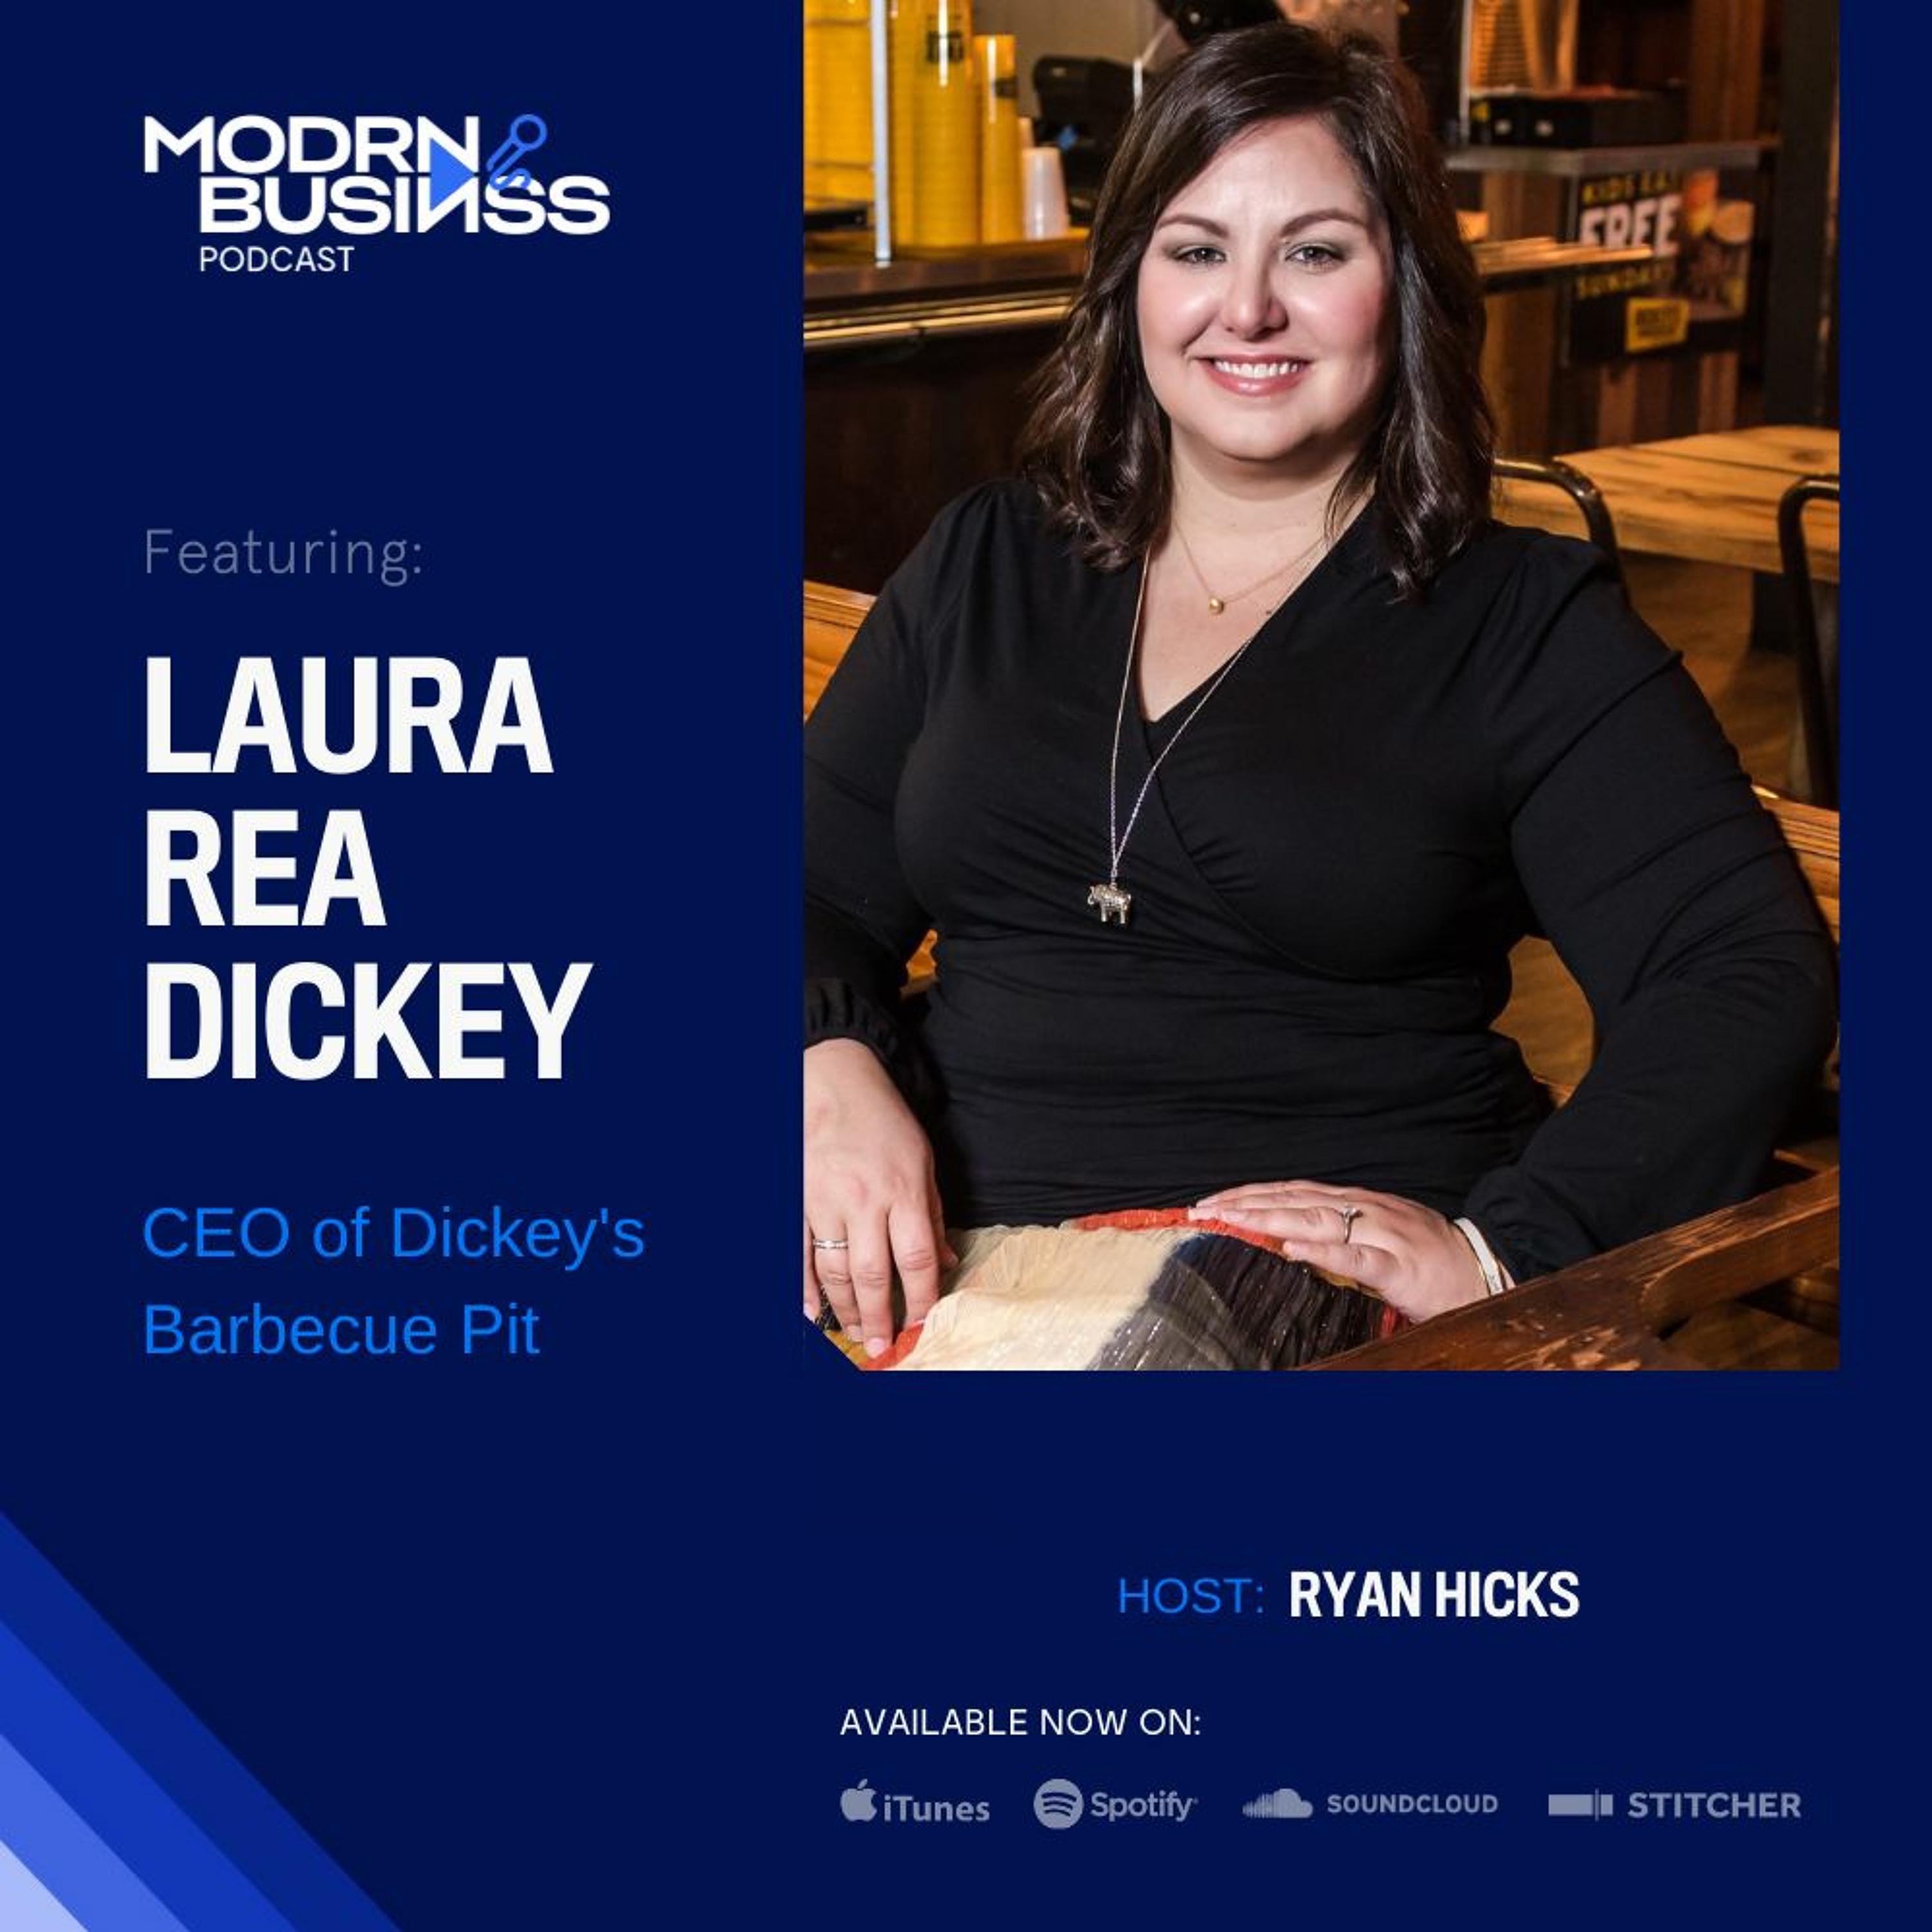 Laura Rea Dickey, CEO of Dickey's Barbecue Pit